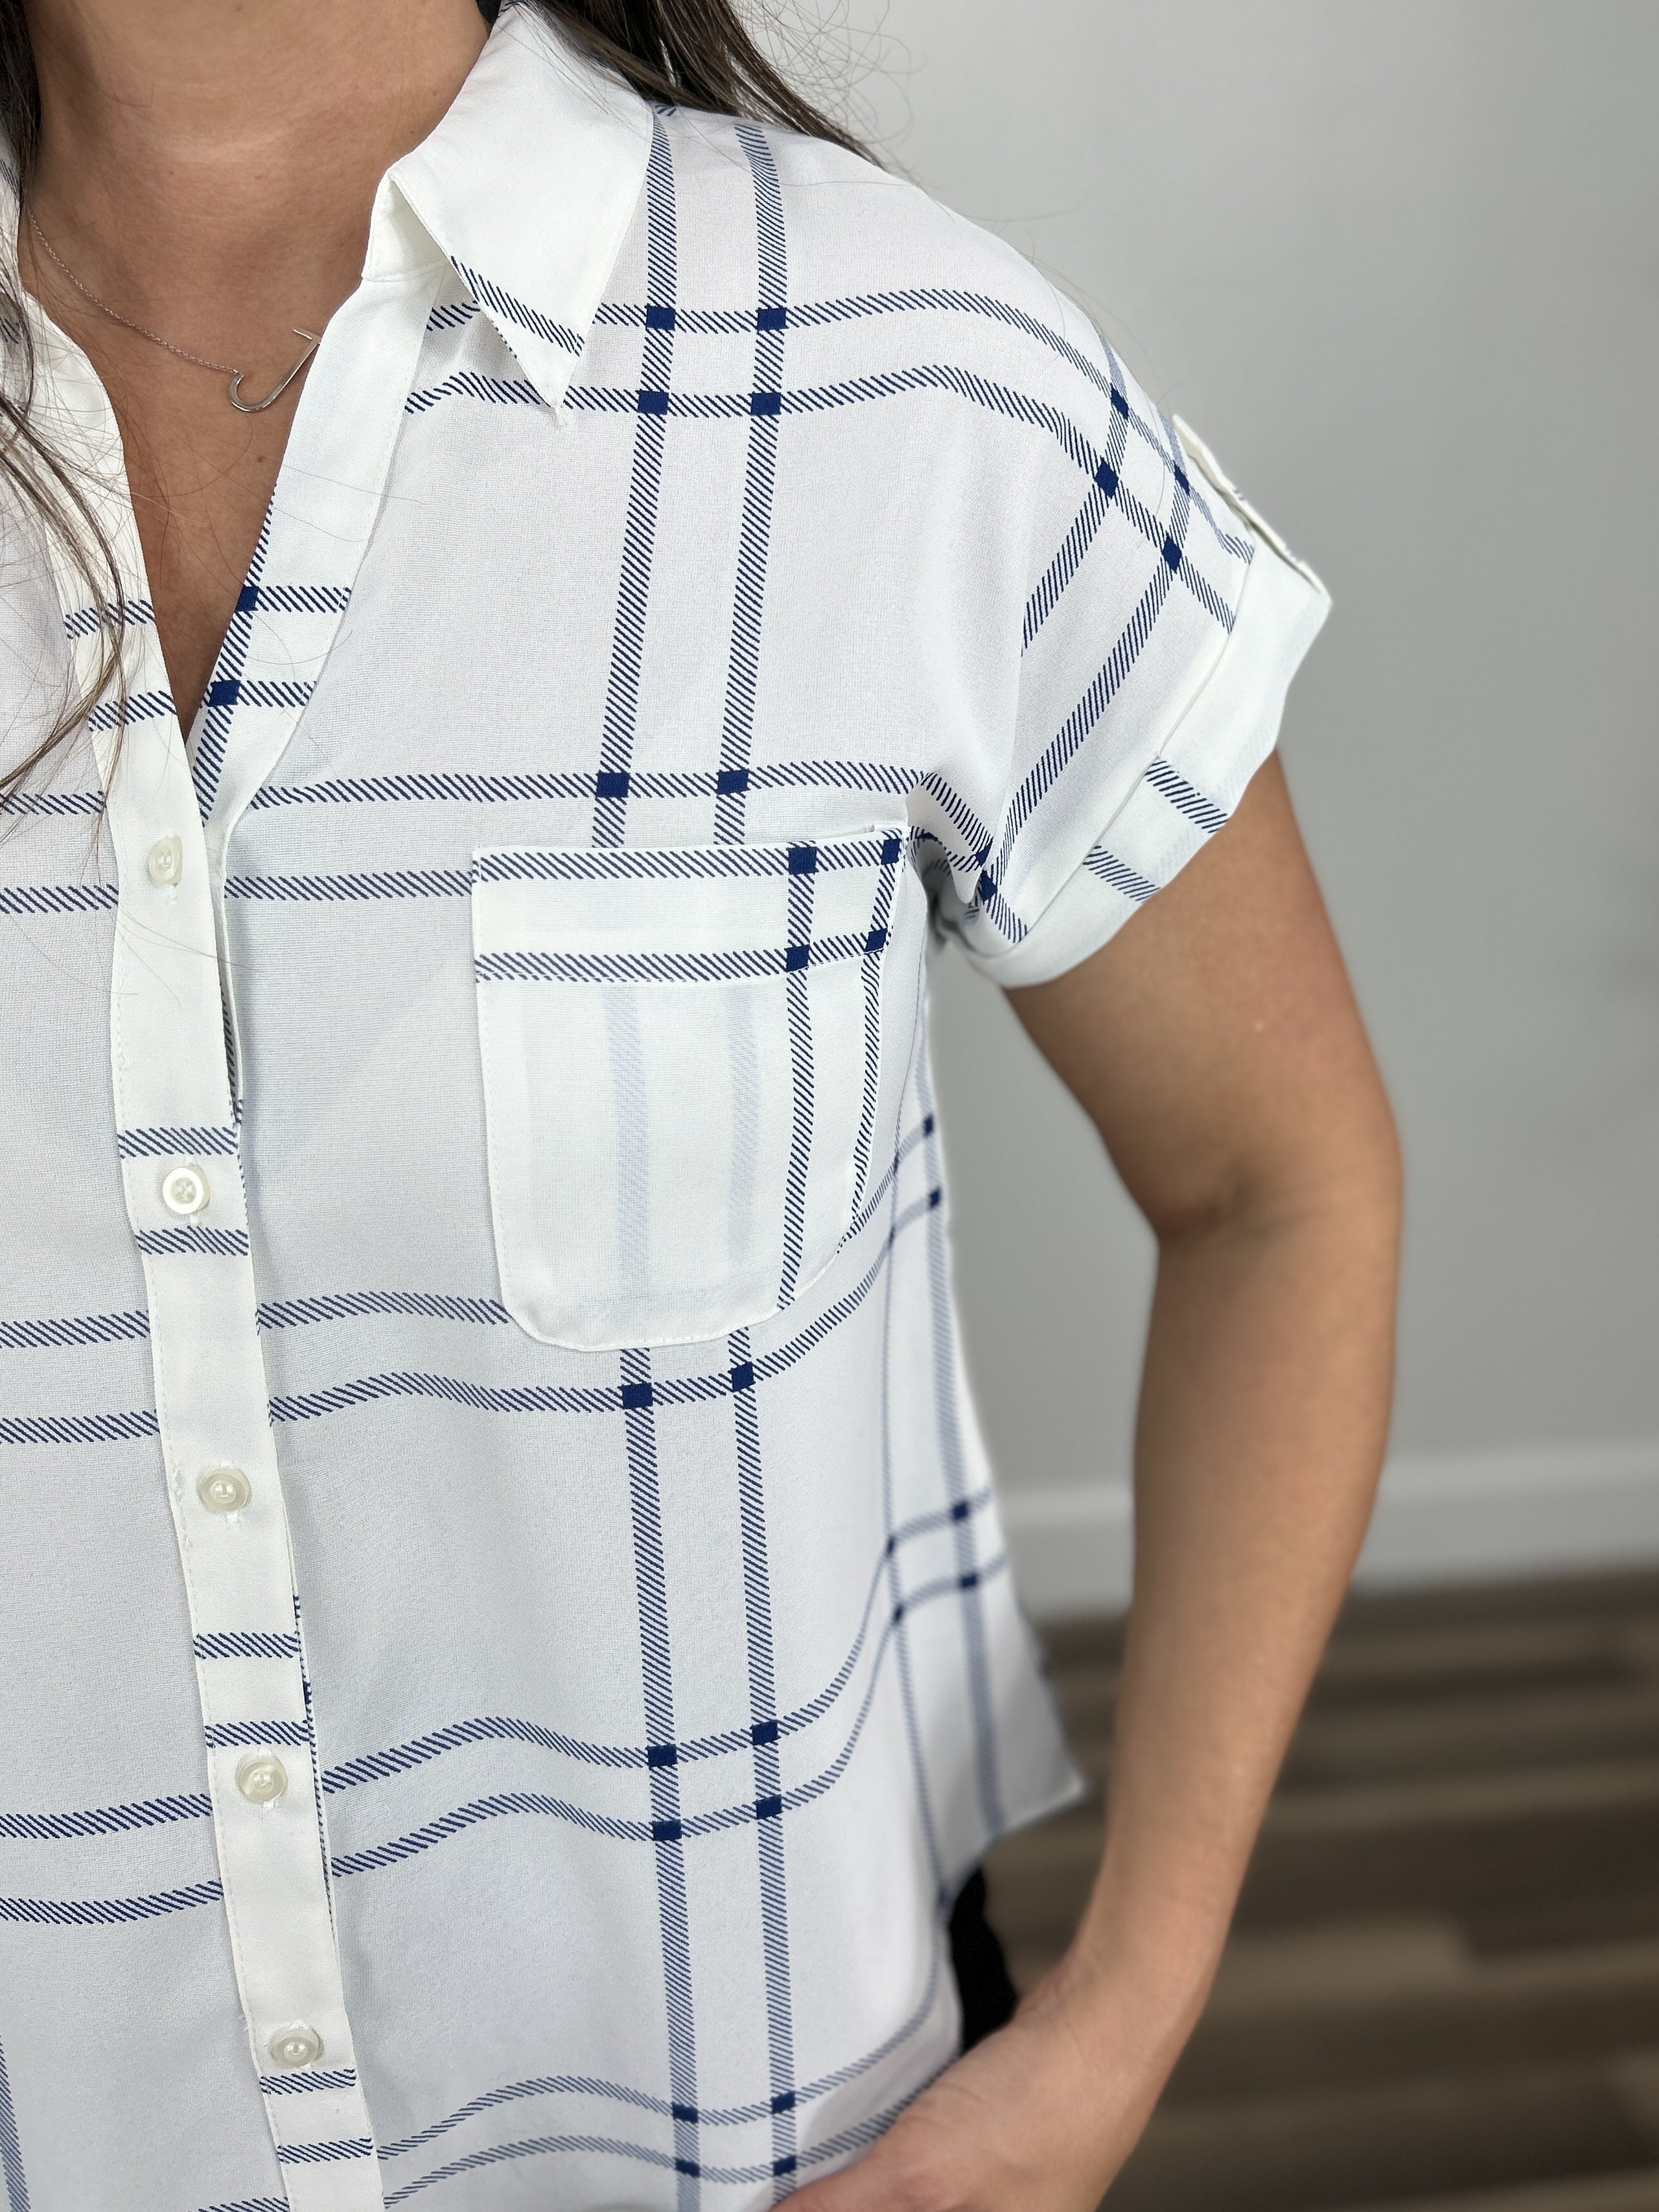 Upclose view of the blue and white Franklin button down top with front chest pocket and button detailing.